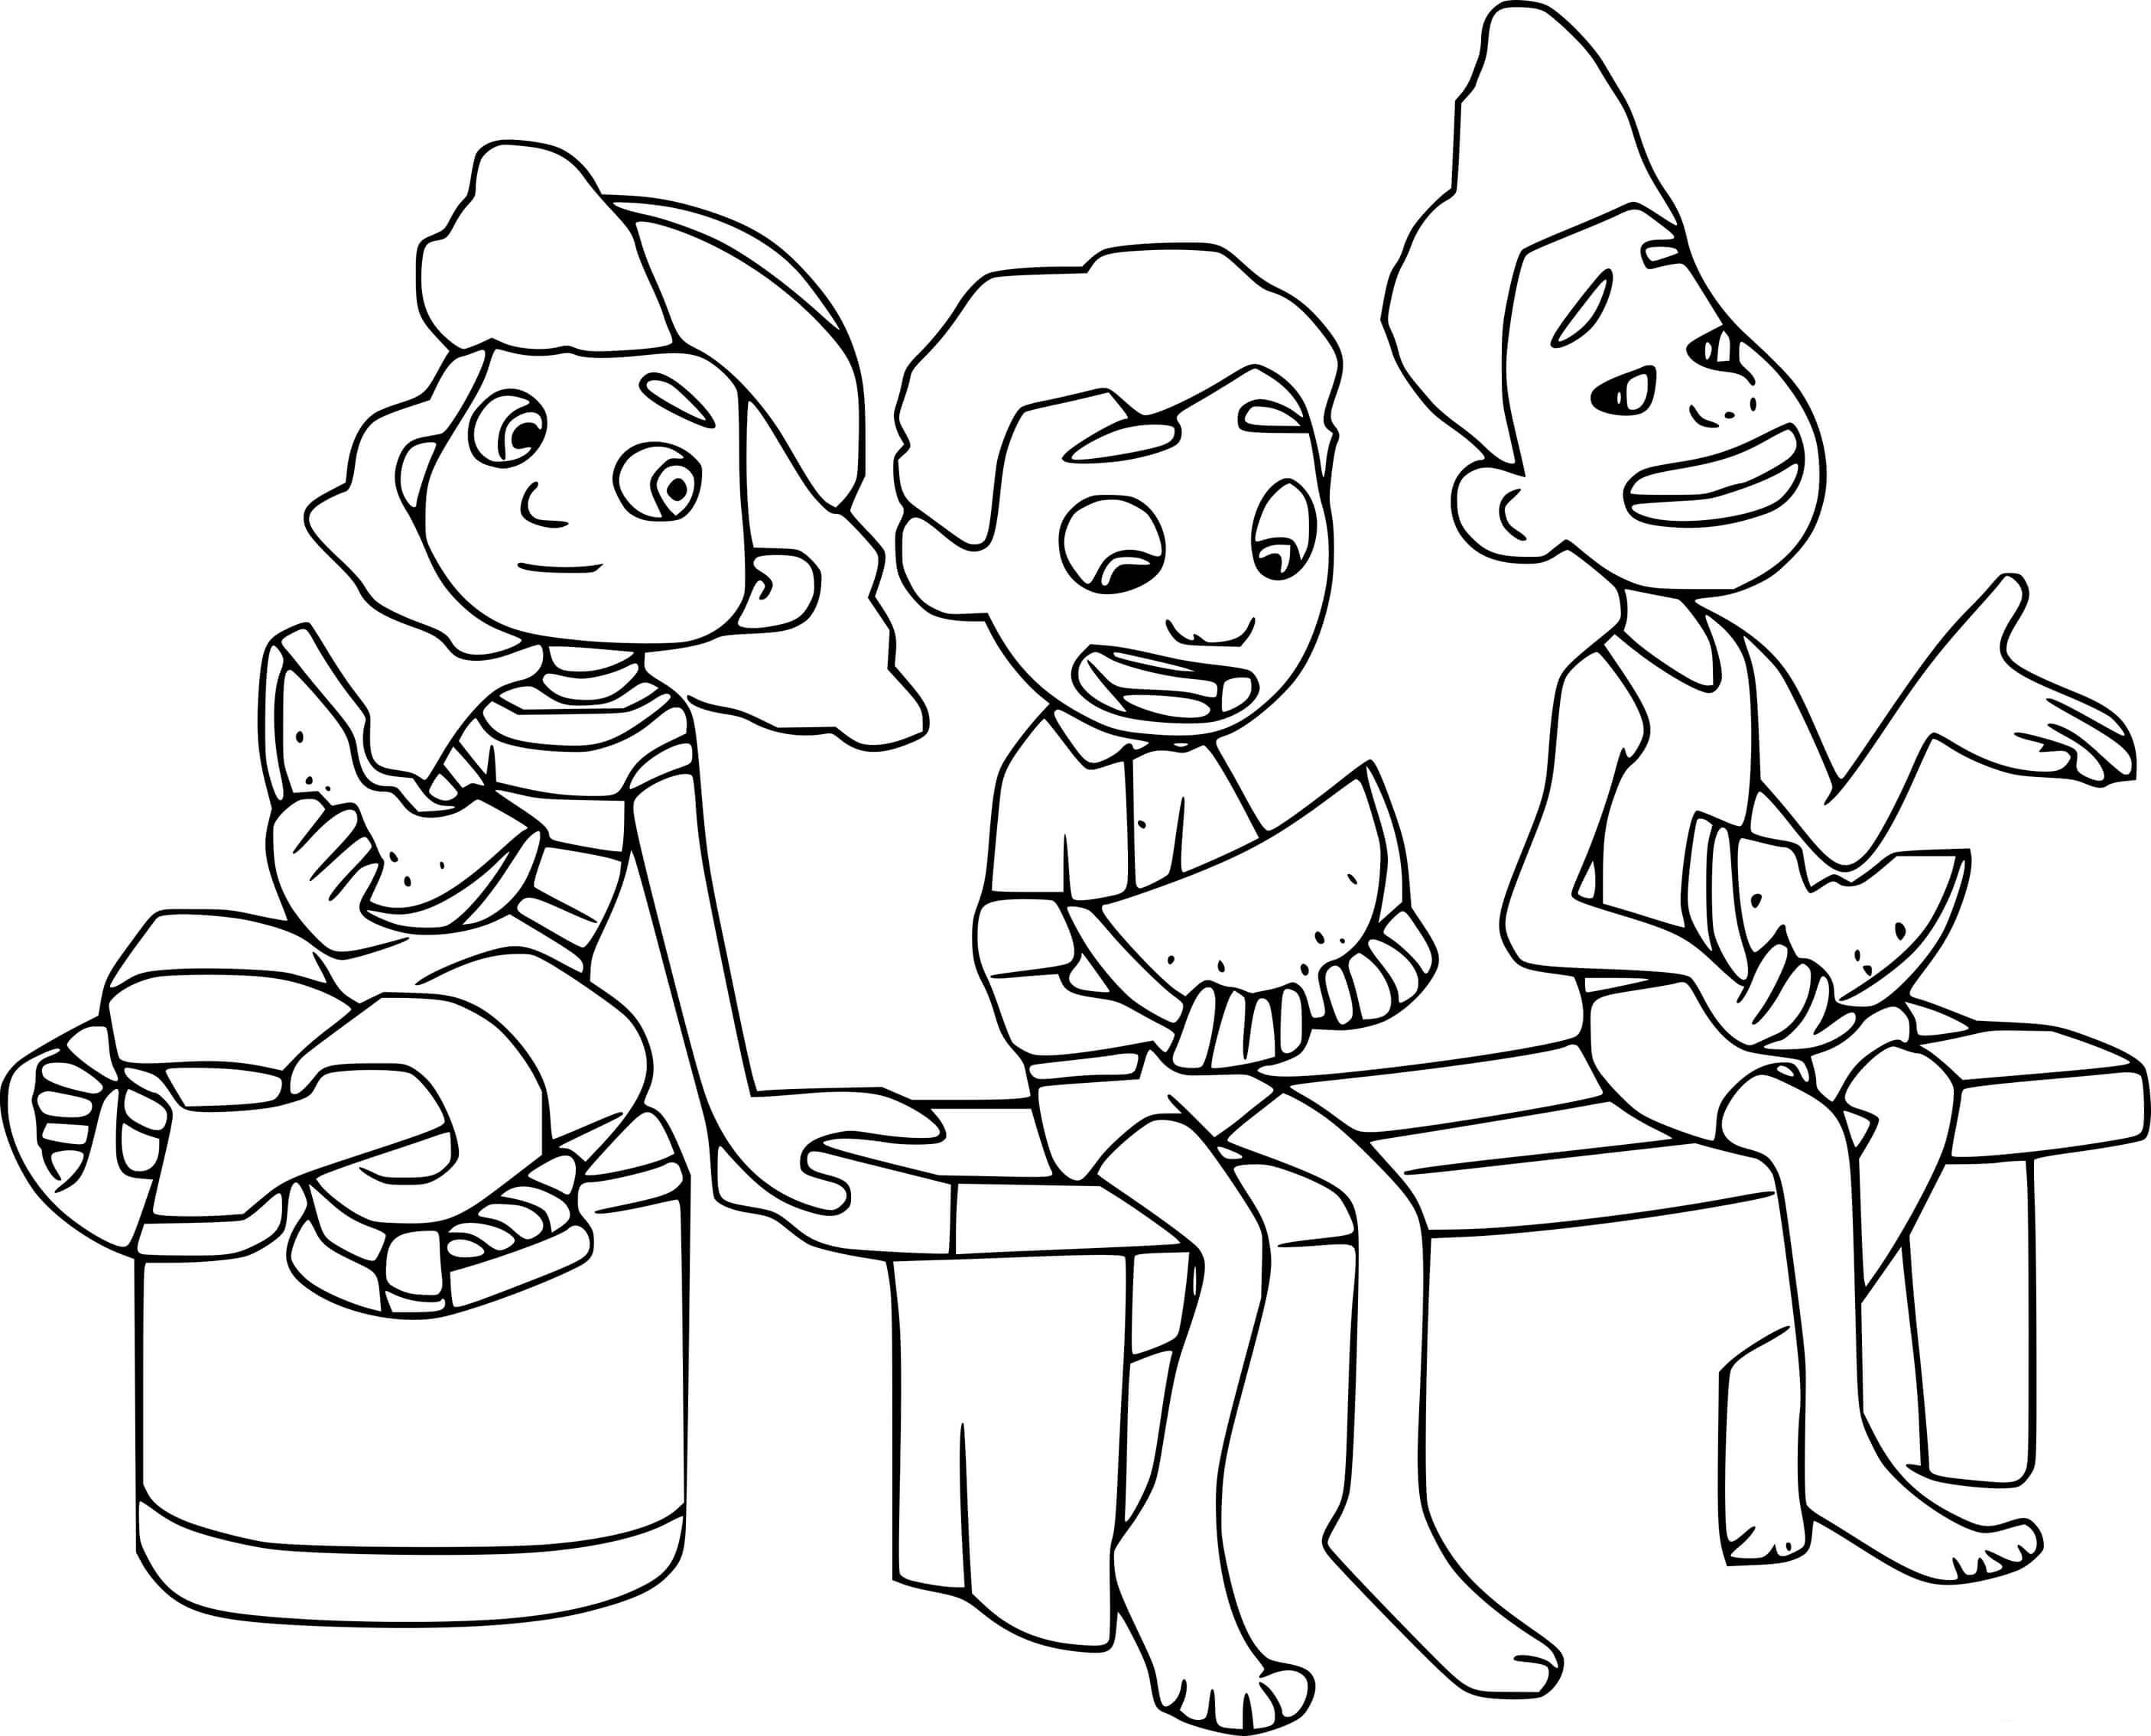 Luca Coloring Pages - Best Coloring Pages For Kids